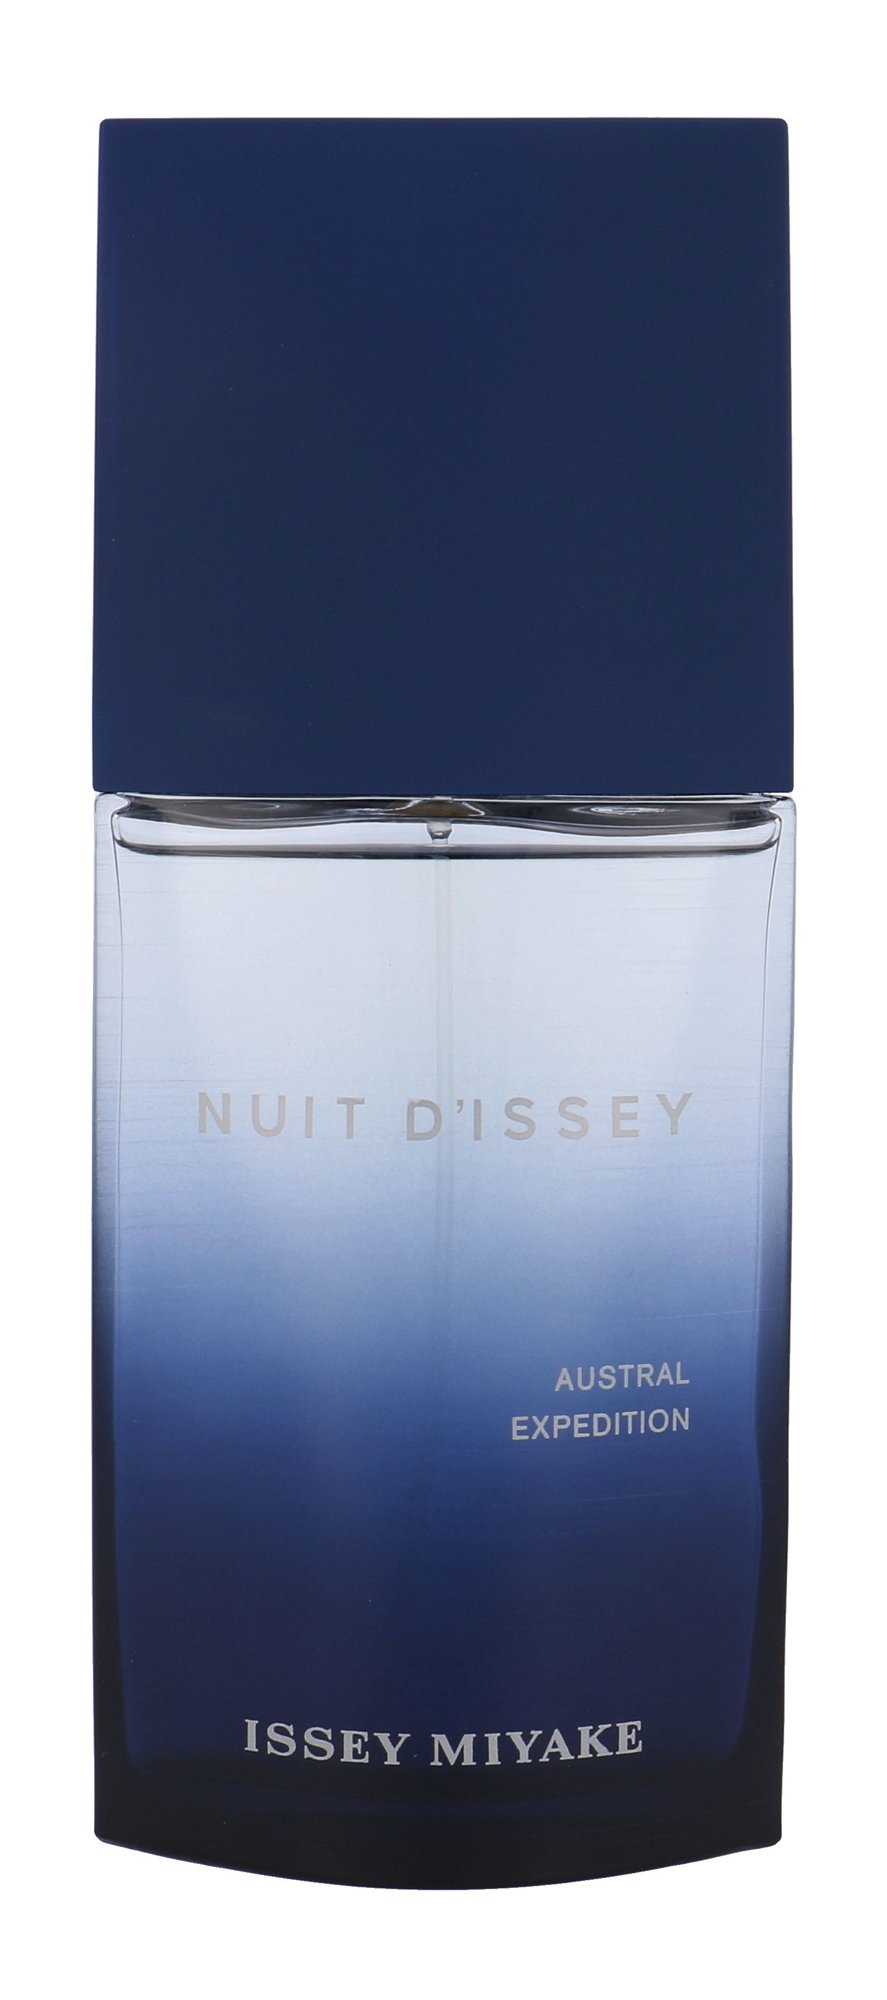 Issey Miyake Nuit d´Issey Austral Expedition